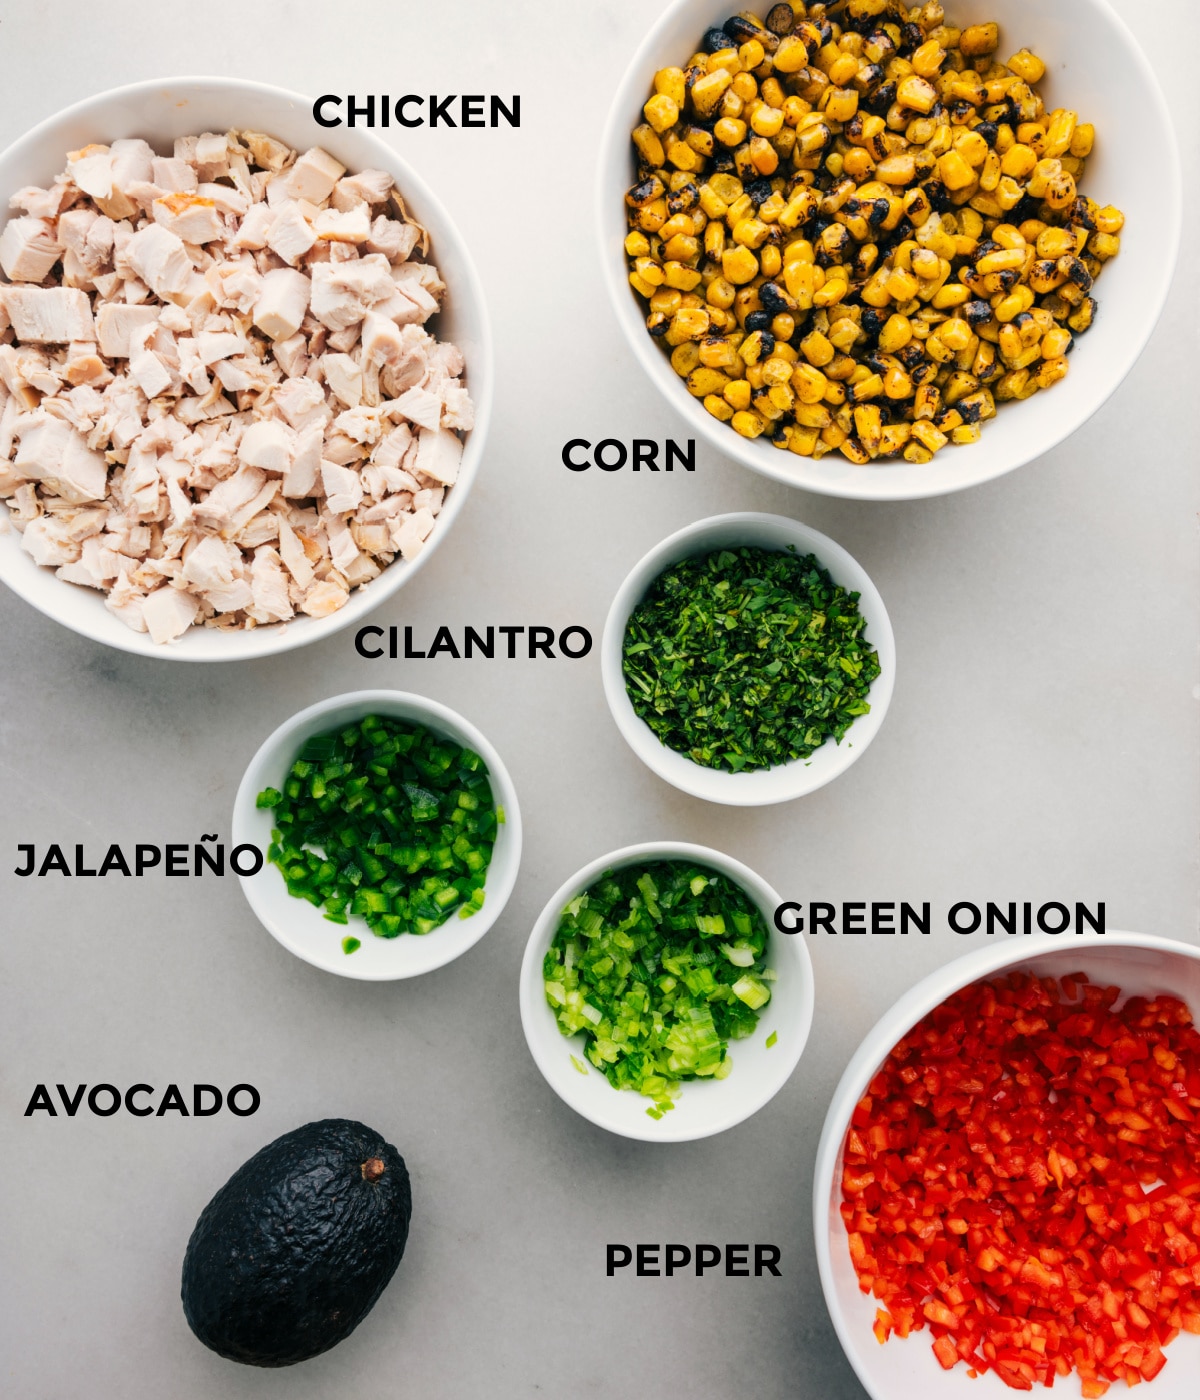 The ingredients for Mexican street corn chicken salad prepped out for easy assembly.